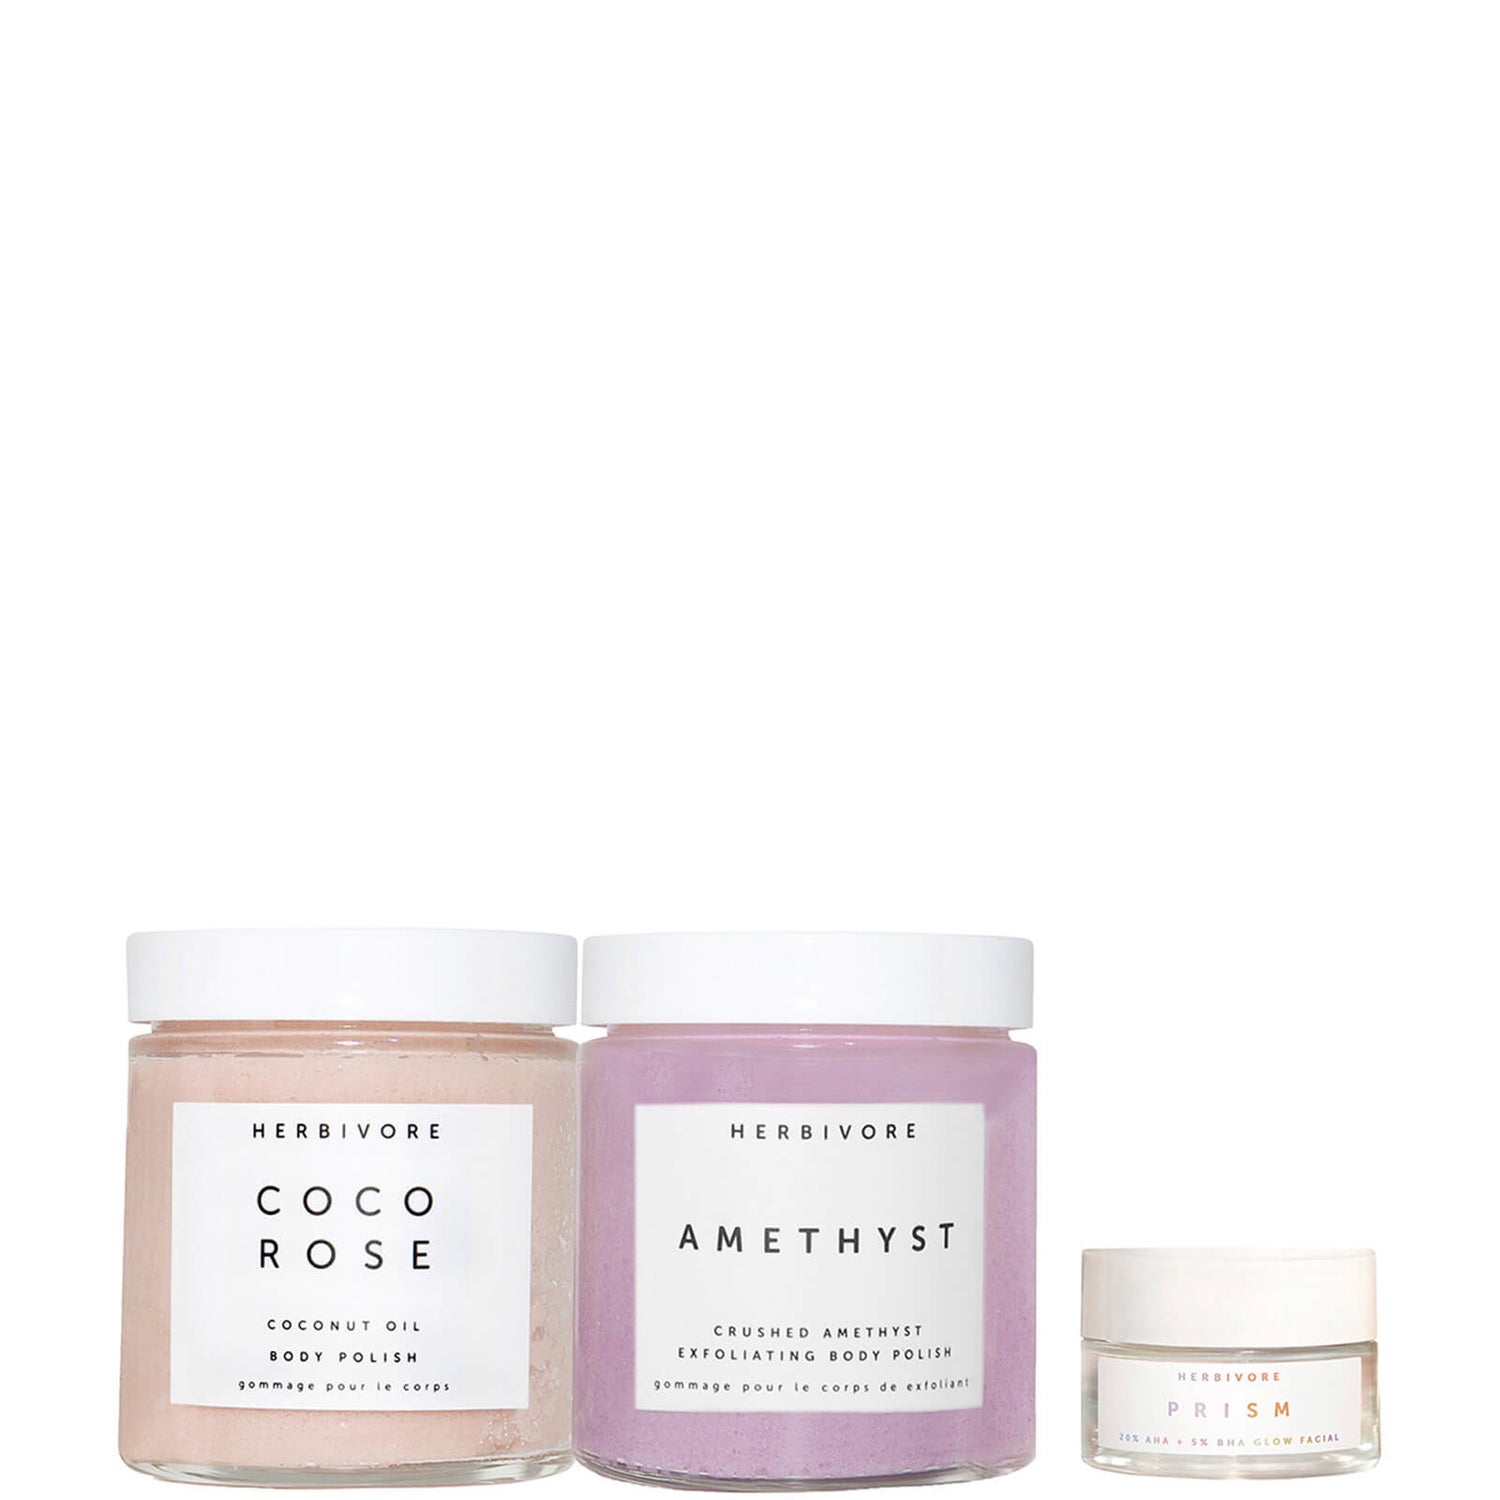 Herbivore Exfoliate and Glow From Head to Toe Set (Worth £36.00)